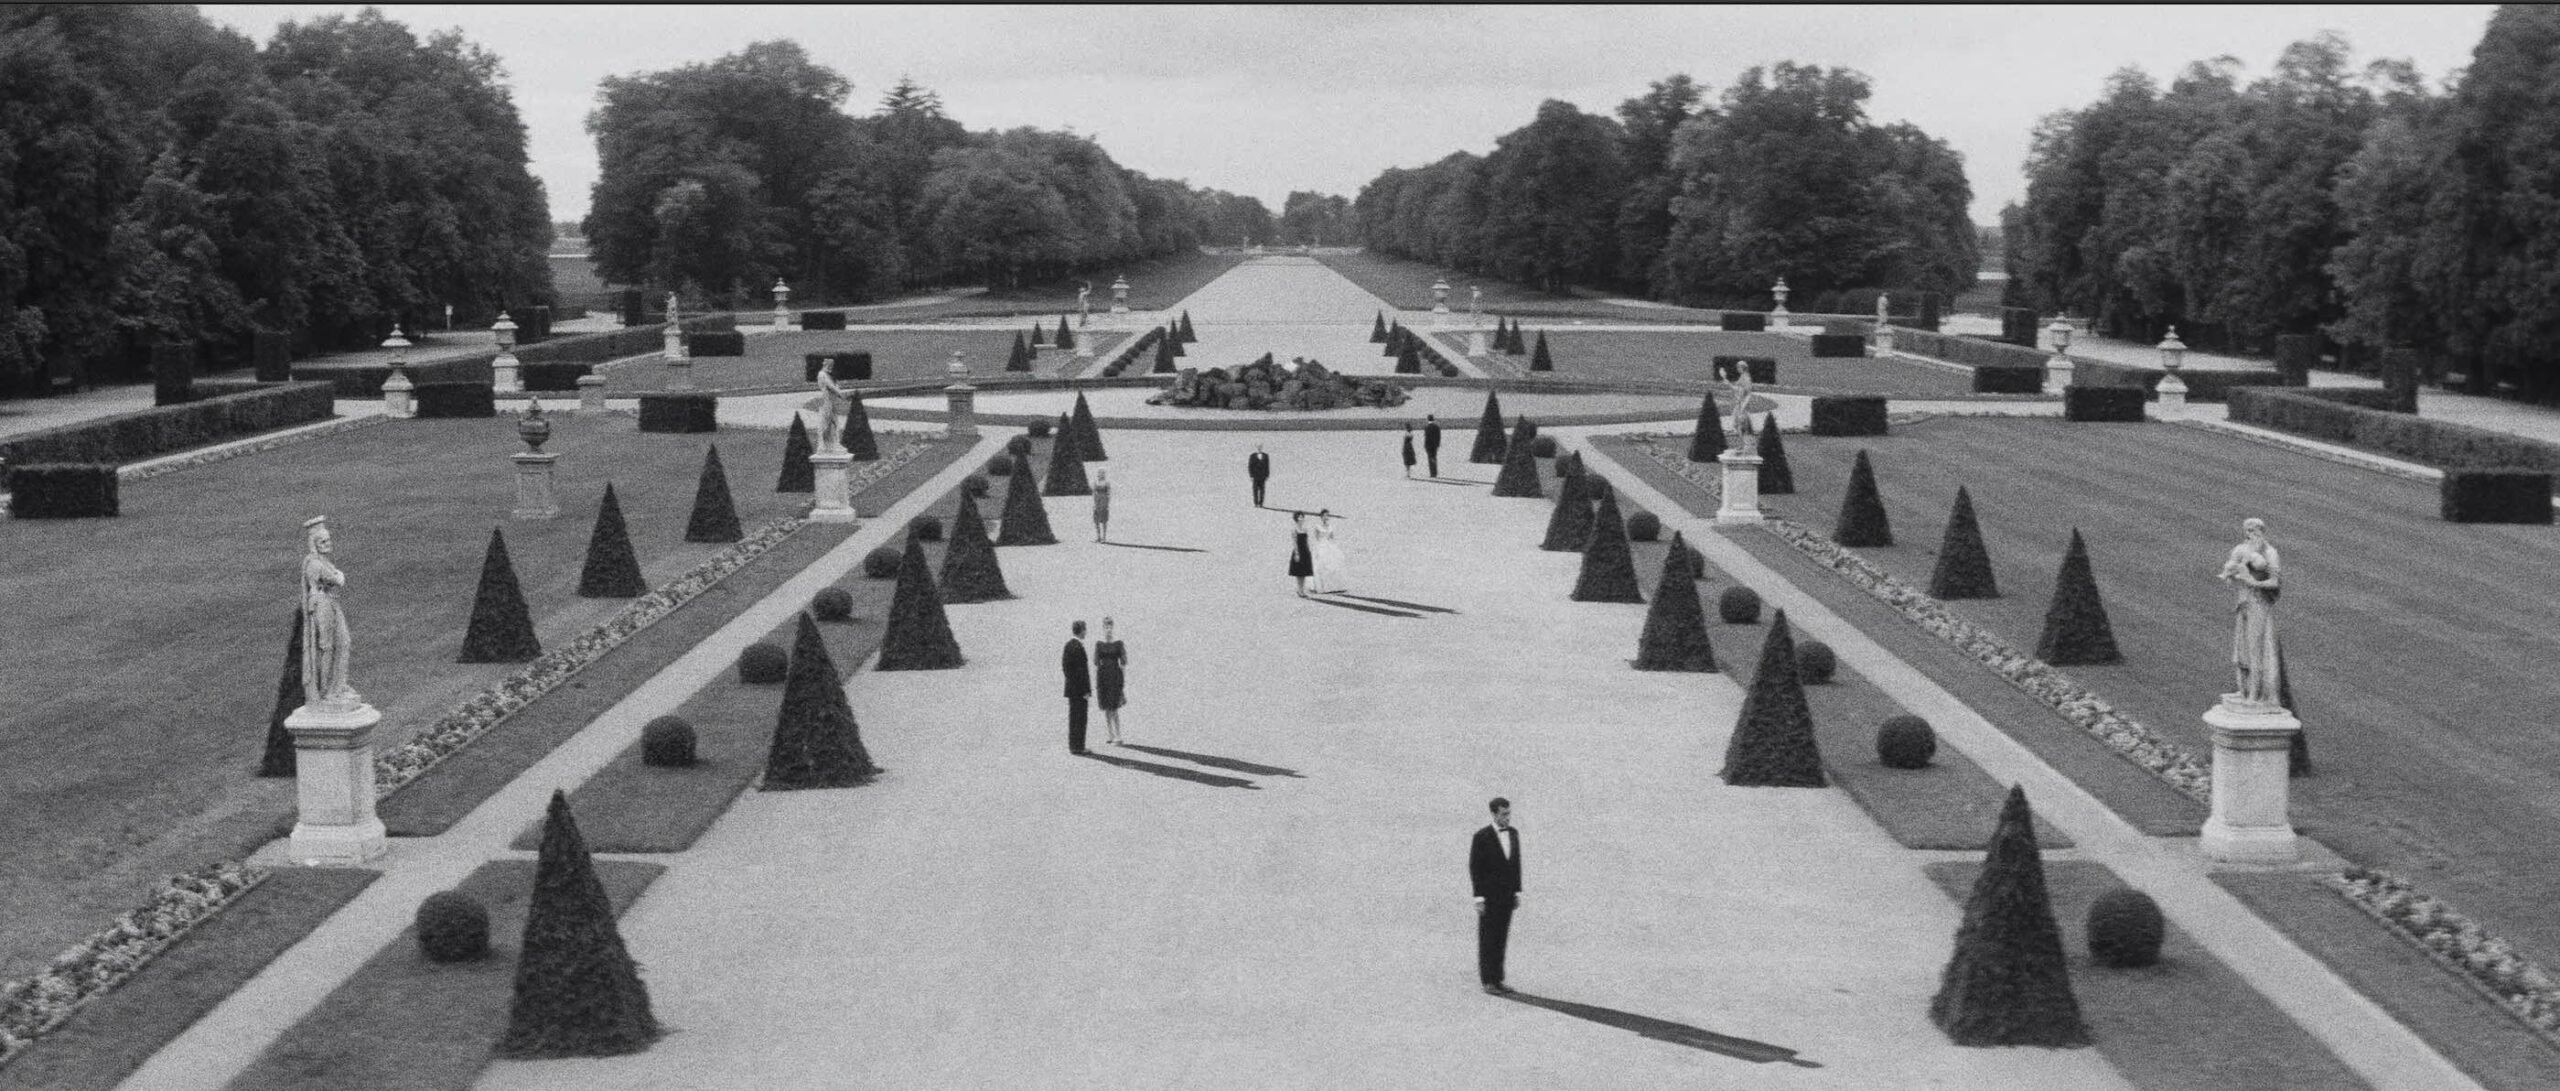 A black & white painting of a large, formal, elegant garden with shrubbery sculpted in the shape of pyramids, statutes, fountains, and lots of lawn. Interspersed throughout, men and women stand in dressed in formal wear, casting long shadows.